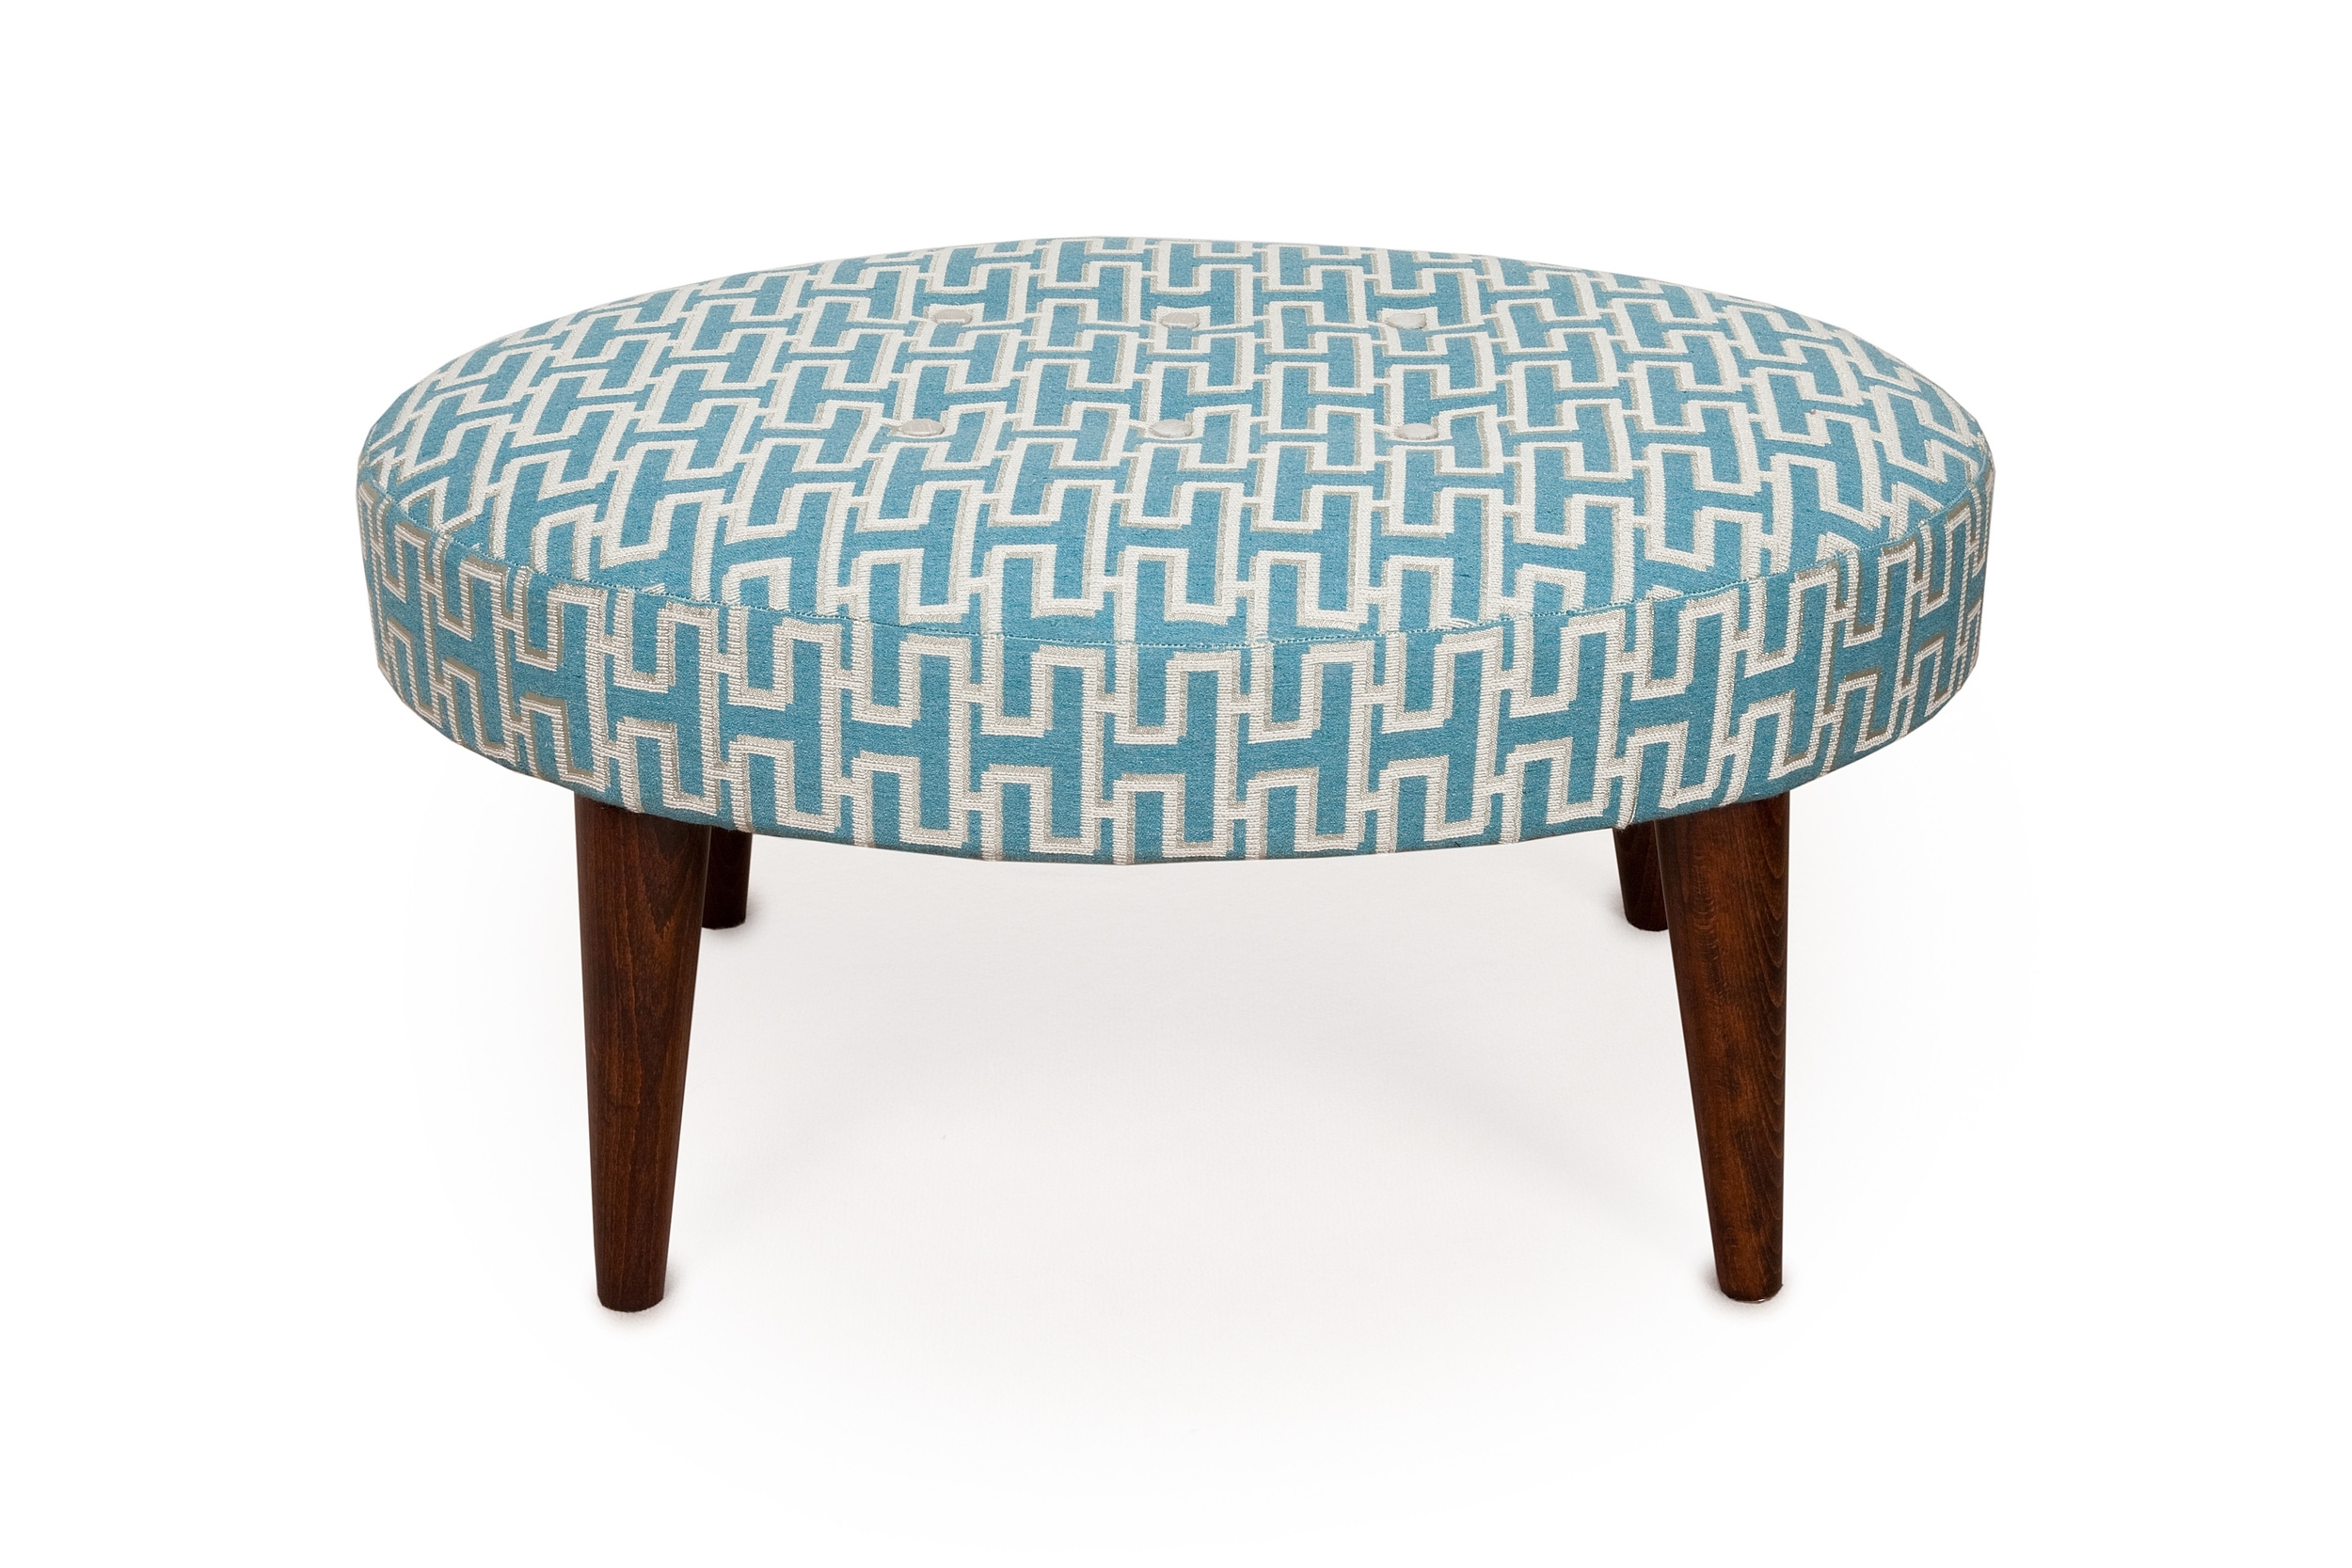  Small oval buttoned stool £295 + fabric 